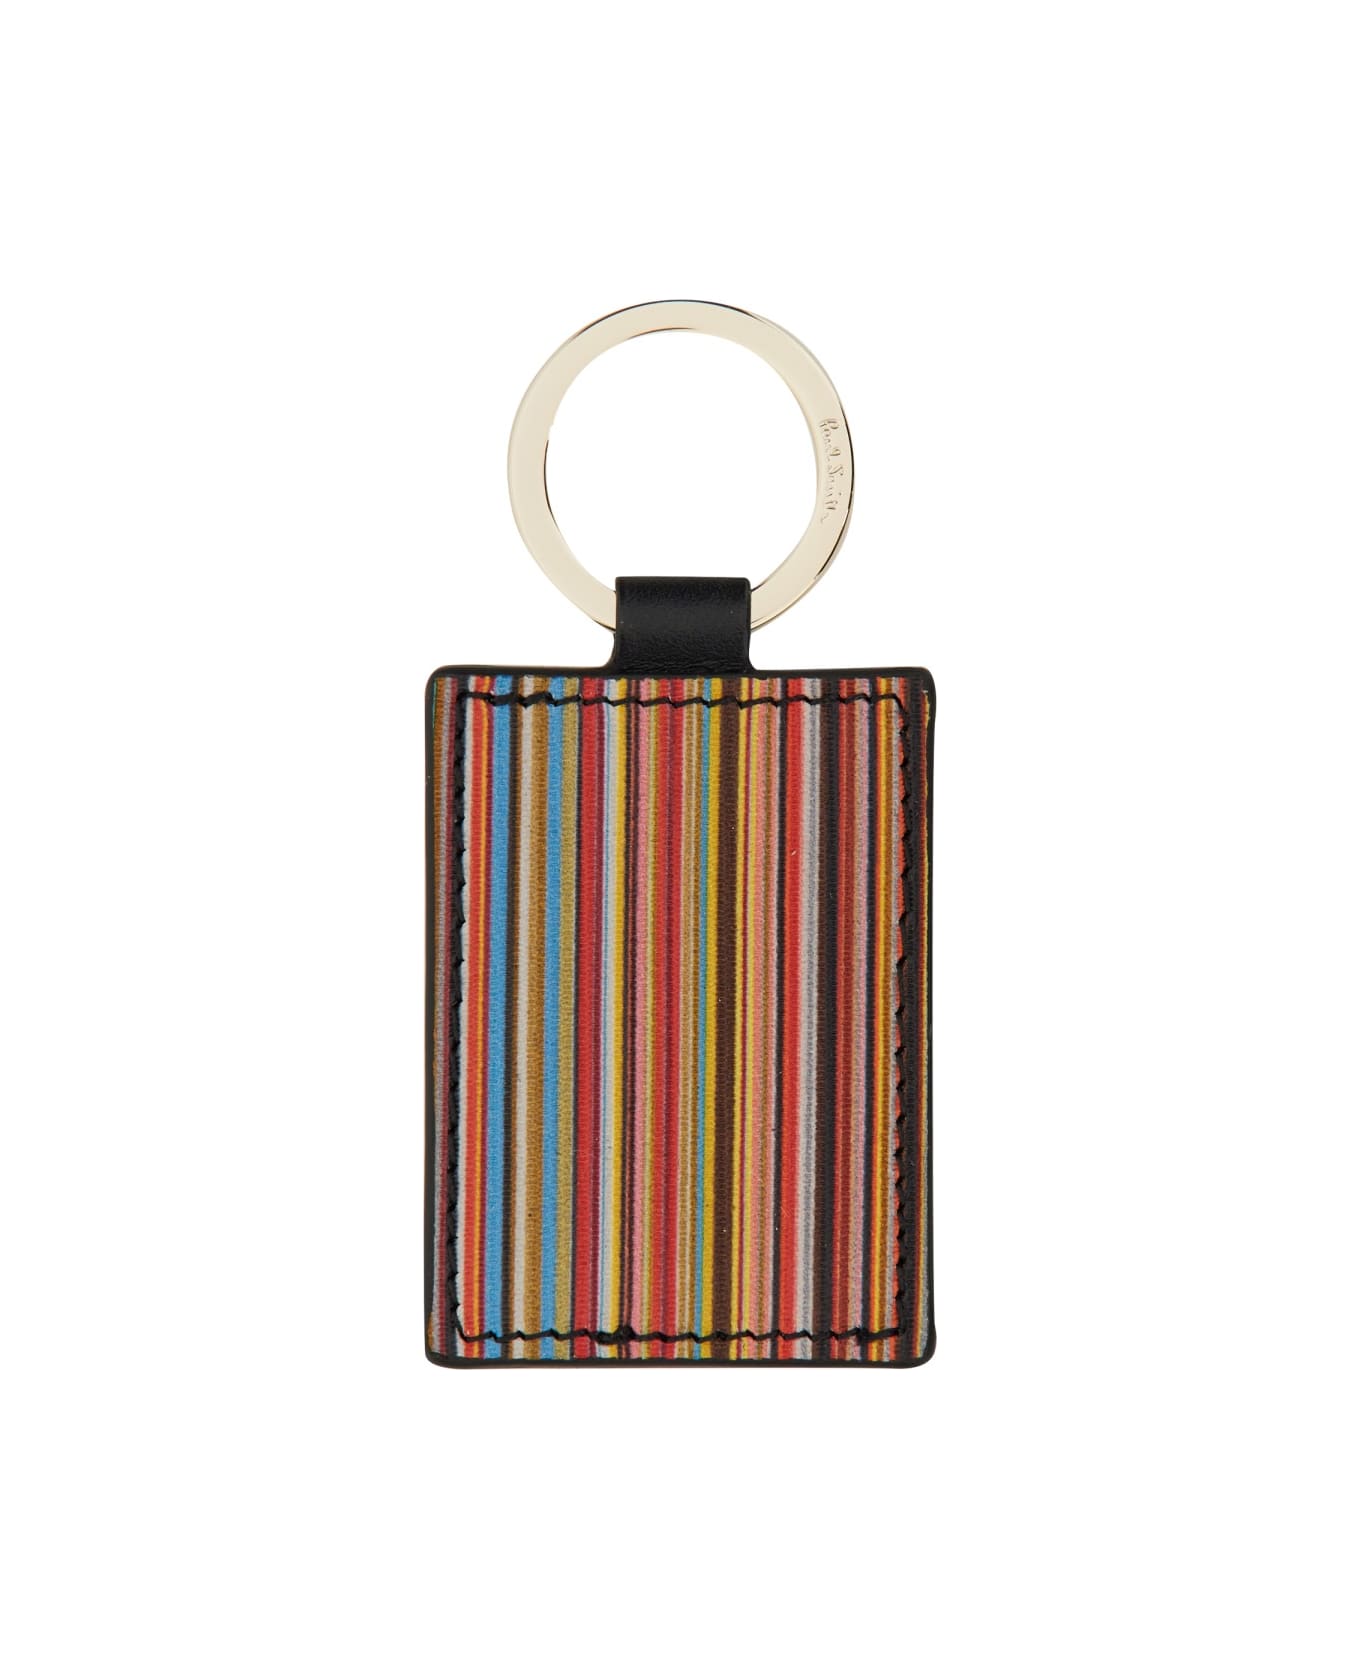 PS by Paul Smith Leather Keychain Keyring - BLACK